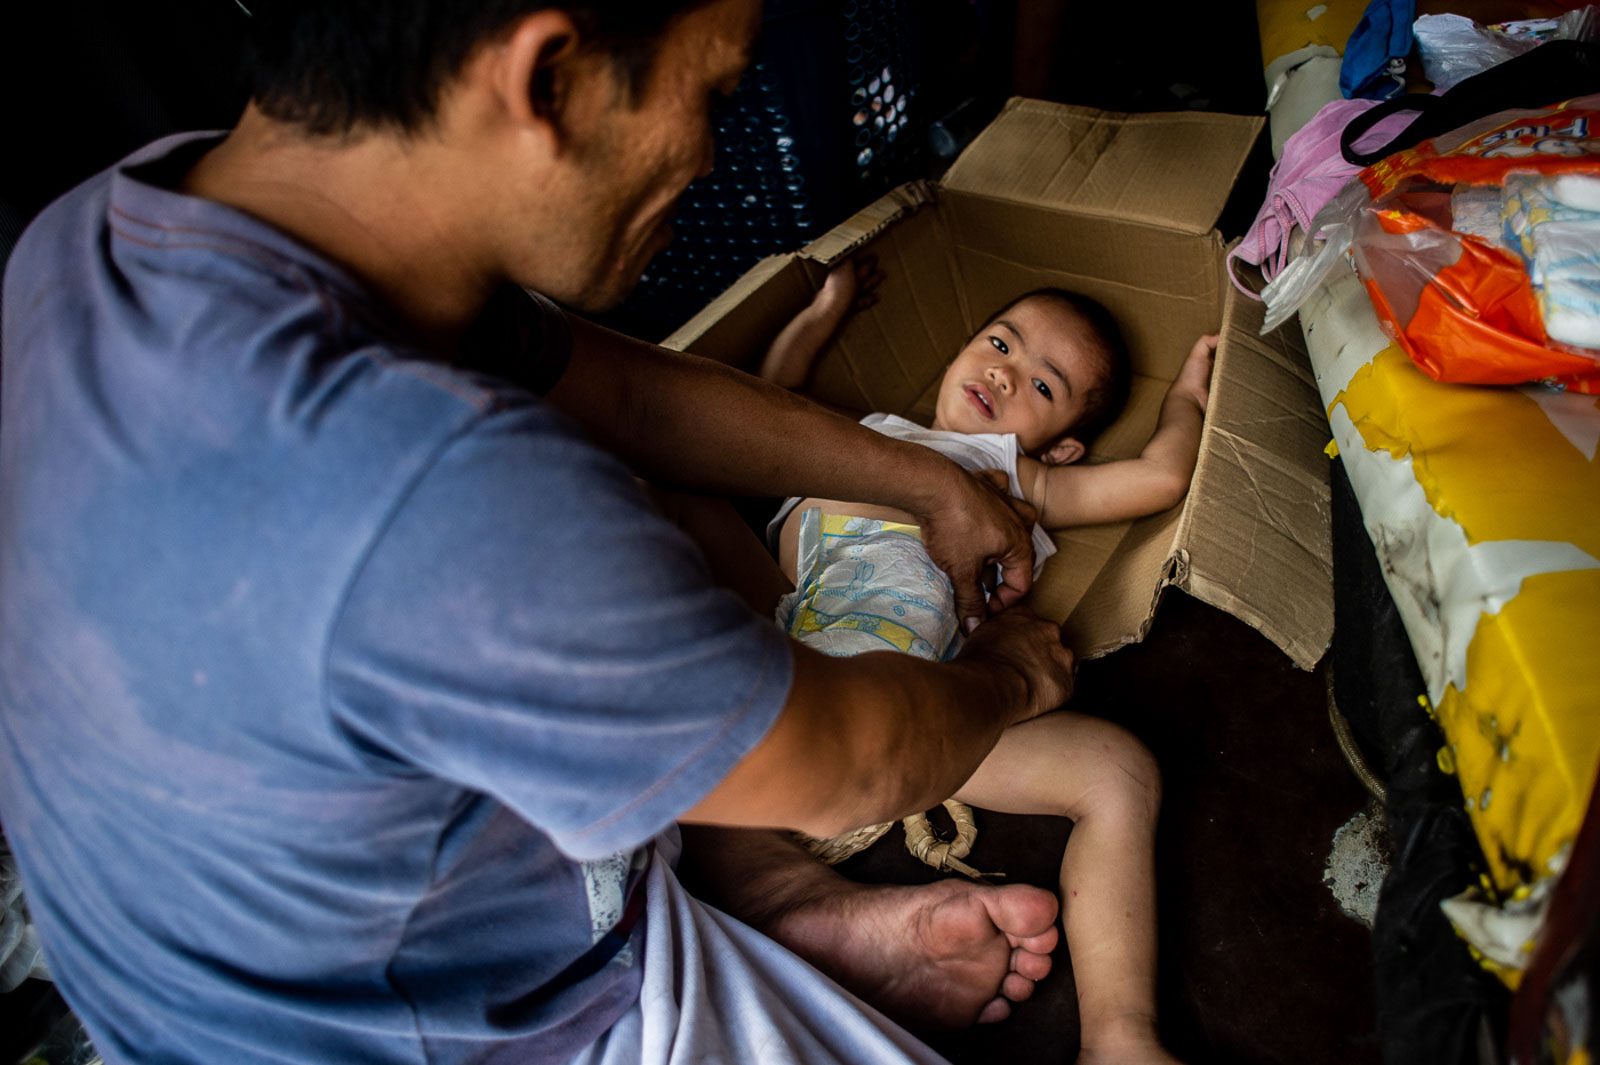 GRATEFUL. Julius puts on a diaper on his 2-year-old son. After being featured in several news outlets, donations for his children such as milk and diapers poured in. 